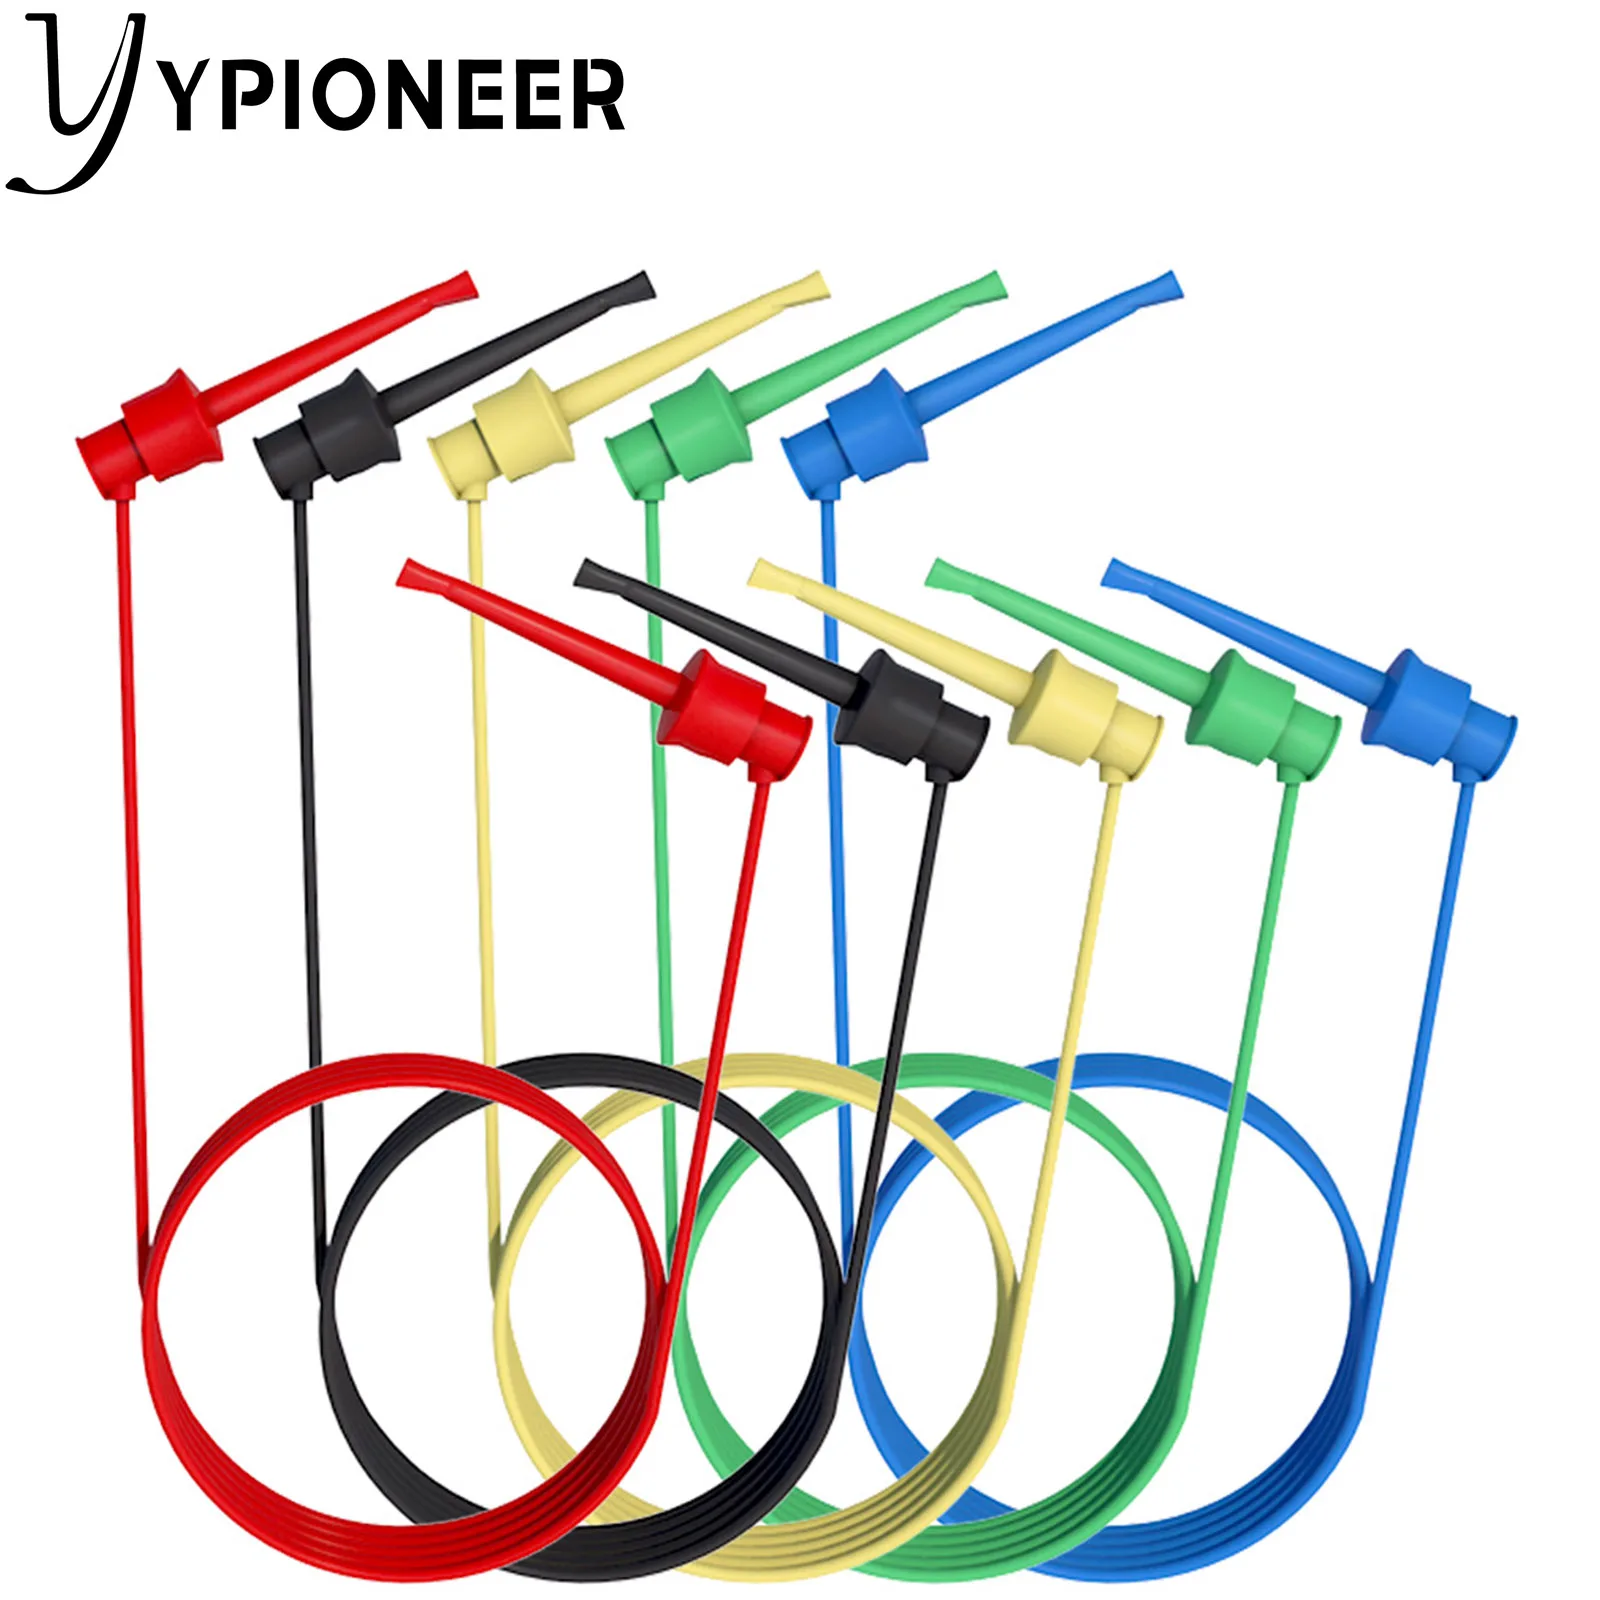 YPioneer P1520 Silicone Test Leads 5PCS Minigrabber to Minigrabber Test Cable Wires Dual IC Test Hook Clips for Electrical Test